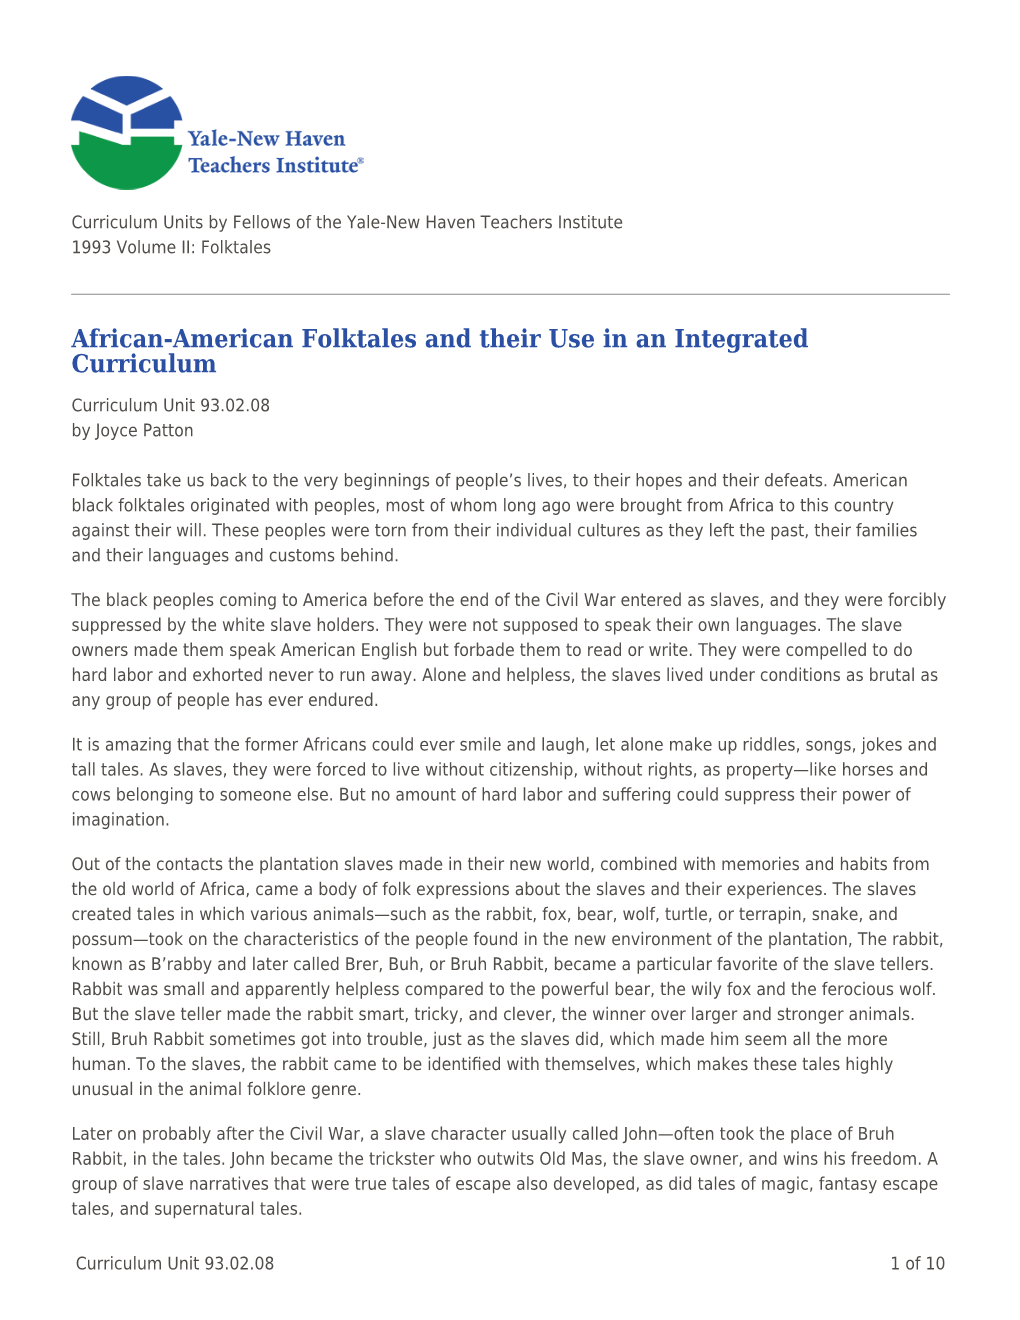 African-American Folktales and Their Use in an Integrated Curriculum